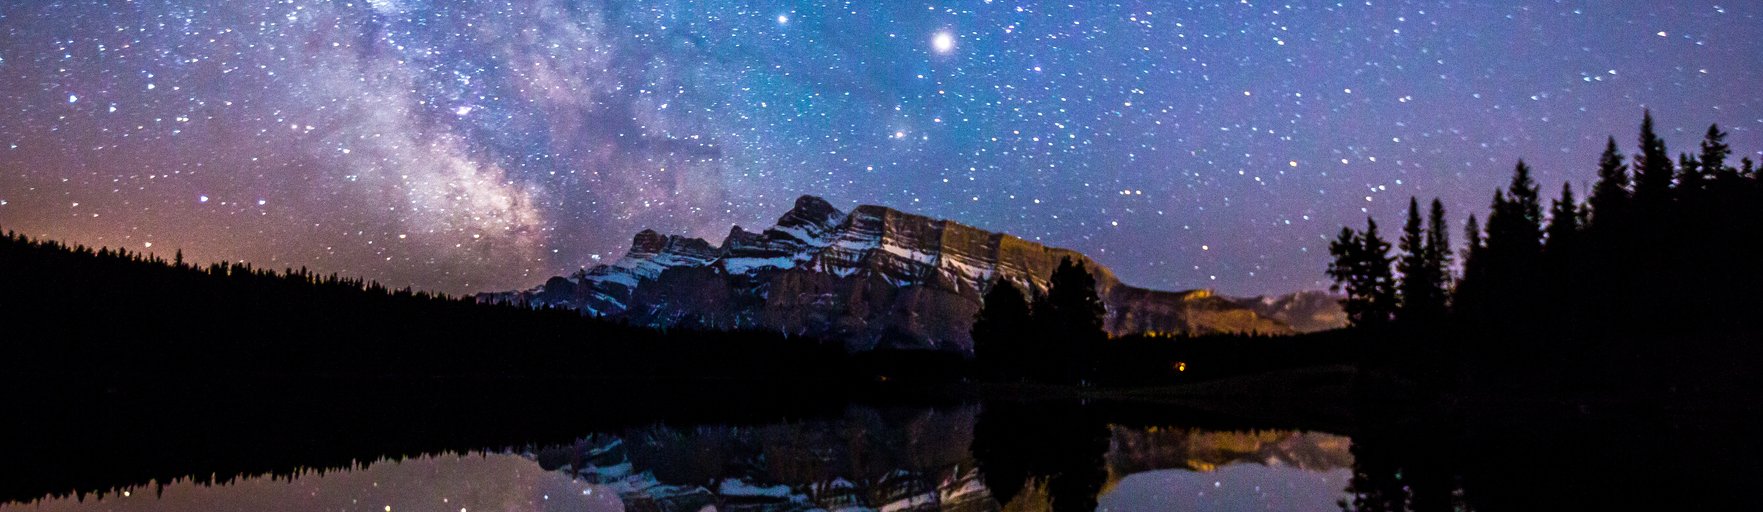 Starry night sky at Mount Rundle